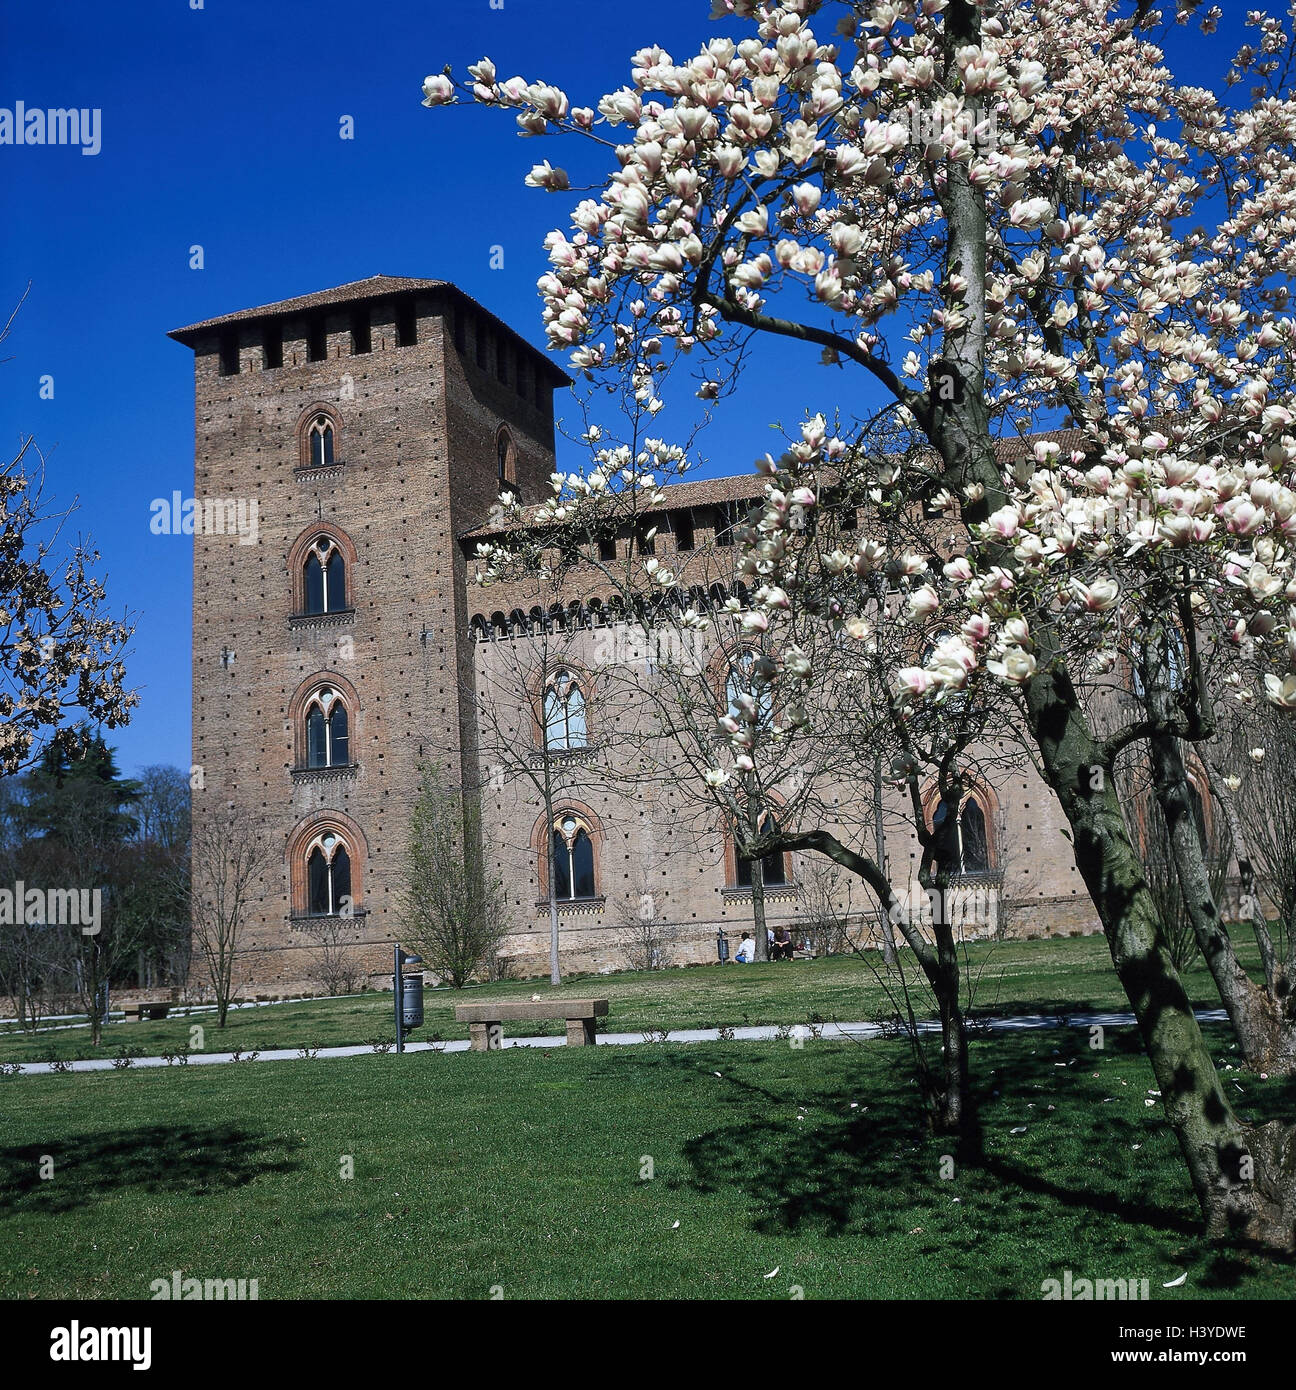 Italy, Lombardy, Pavia, Castello Visconteo, magnolia tree, blossom province Pavia, town, lock, museum, in 1360, former. Ruling seat the prince Visconti, place of interest, spring, Magnolia soulangiana, magnolia blossoms Stock Photo